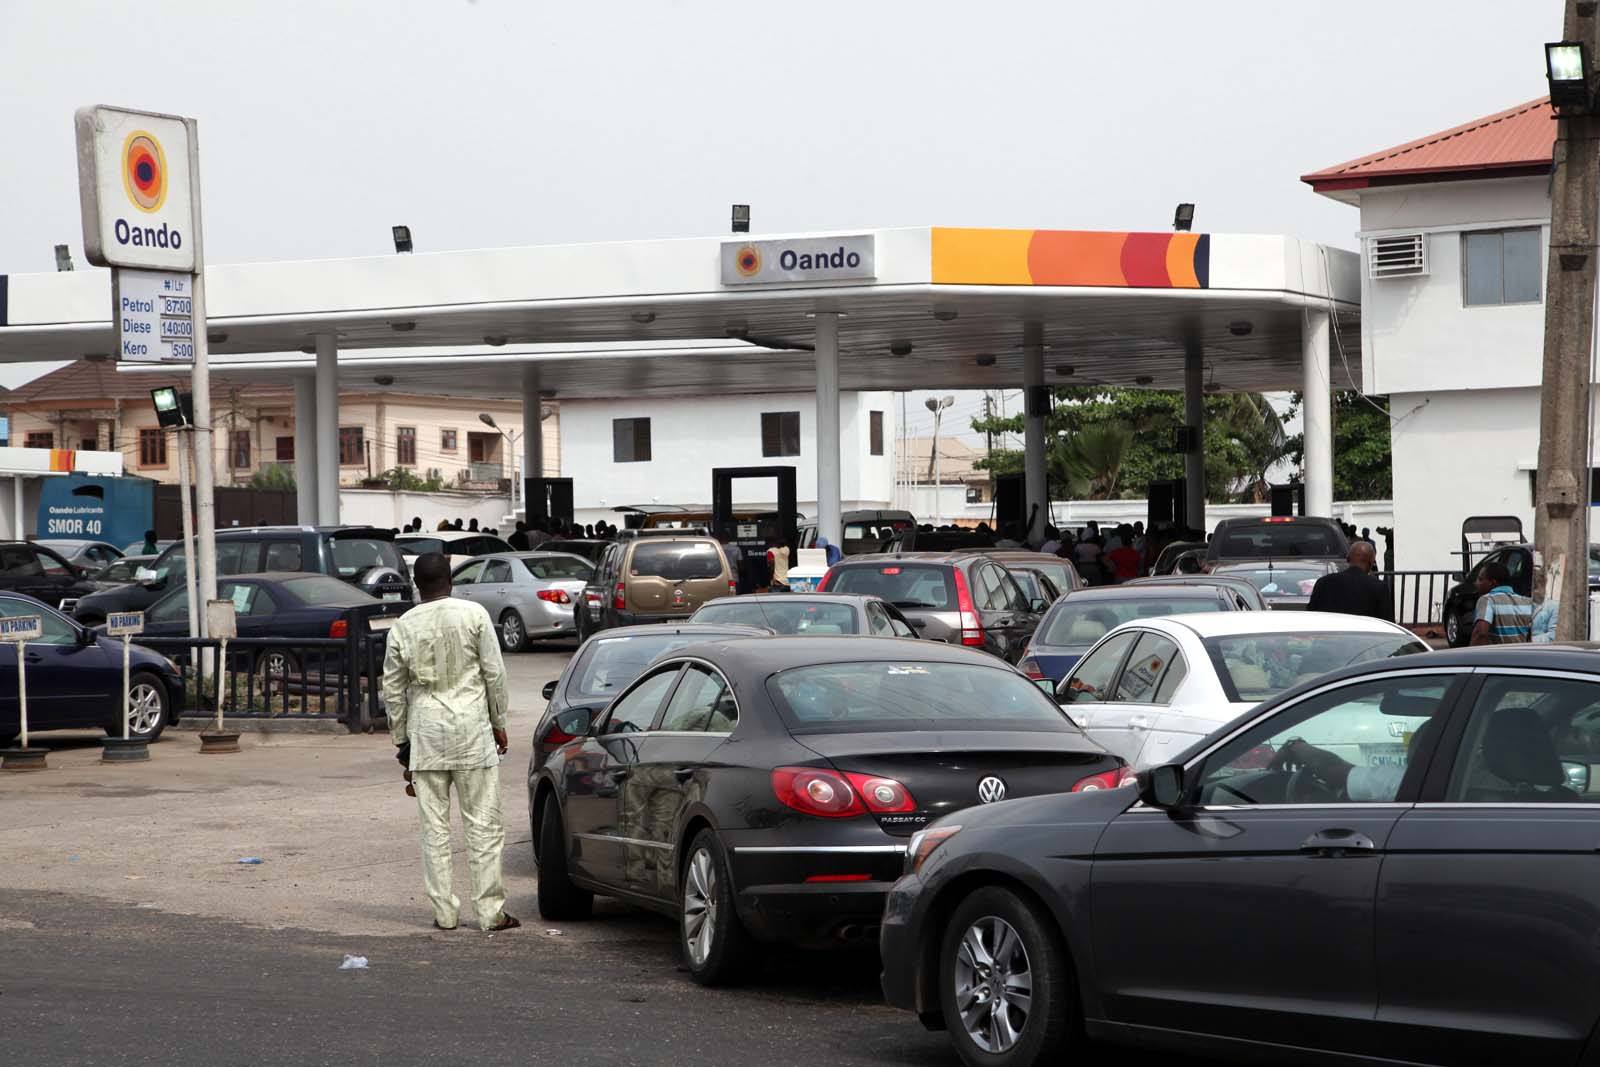 Back home, Africa’s top oil producer is unable to import enough gasoline. Drivers in this city of 21 million have spent days inching through miles-long lines to fill their tanks at the few pumps still operating. 